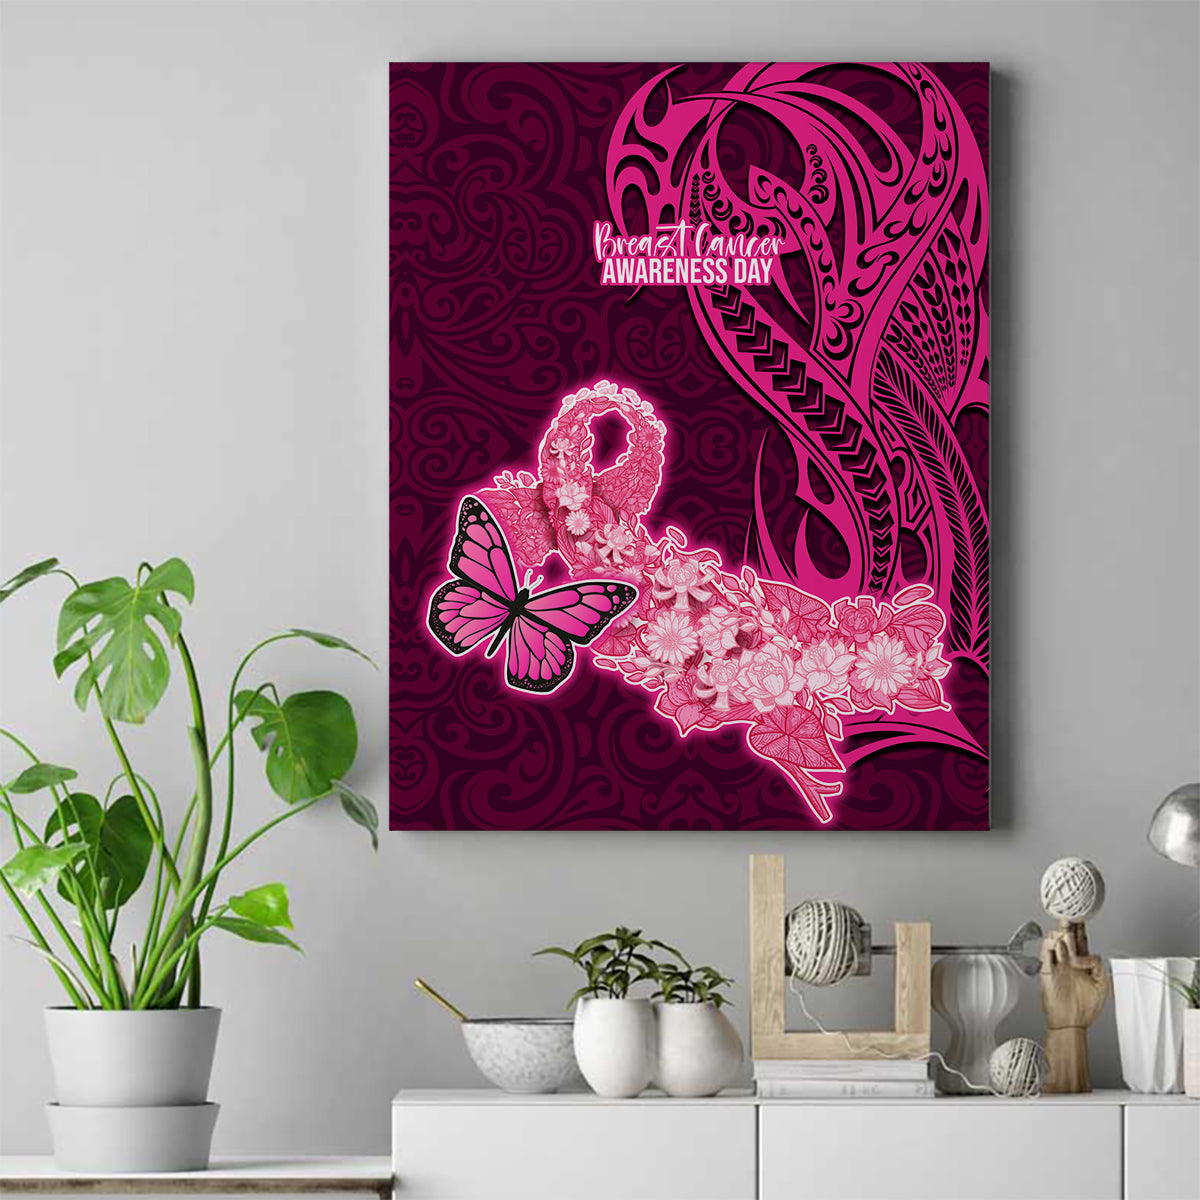 Polynesia Breast Cancer Canvas Wall Art Butterfly and Flowers Ribbon Maori Tattoo Ethnic Pink Style LT03 Pink - Polynesian Pride